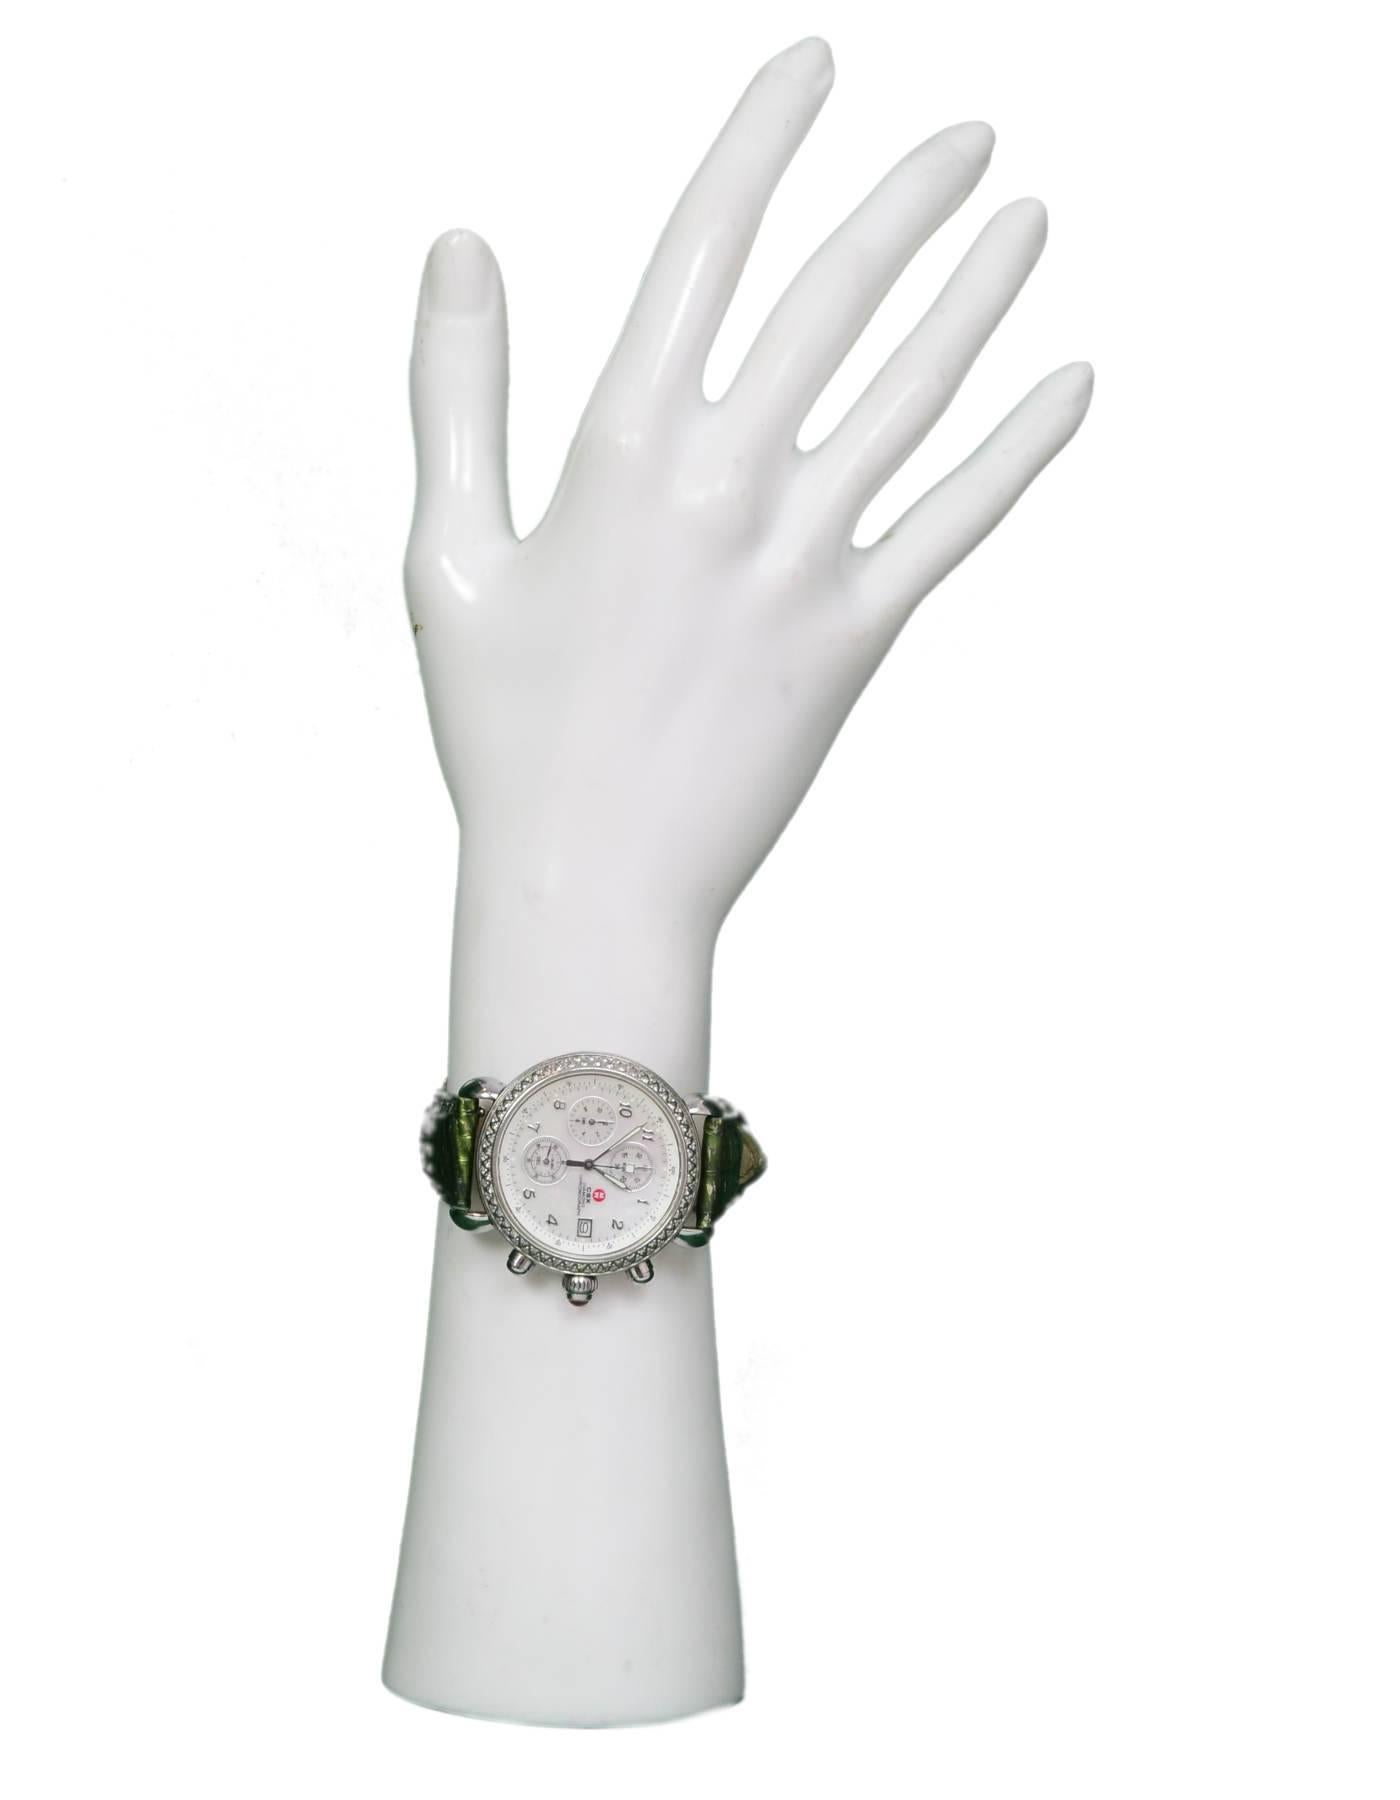 Michele Stainless Steel & Diamonds CSX Watch
Features mother of pearl face and comes with extra straps

Made In: Japan
Color: Silver, multi
Materials: Stainless steel, mop, diamonds
Closure/Opening: Butterfly clasp and buckle closure
Movement: